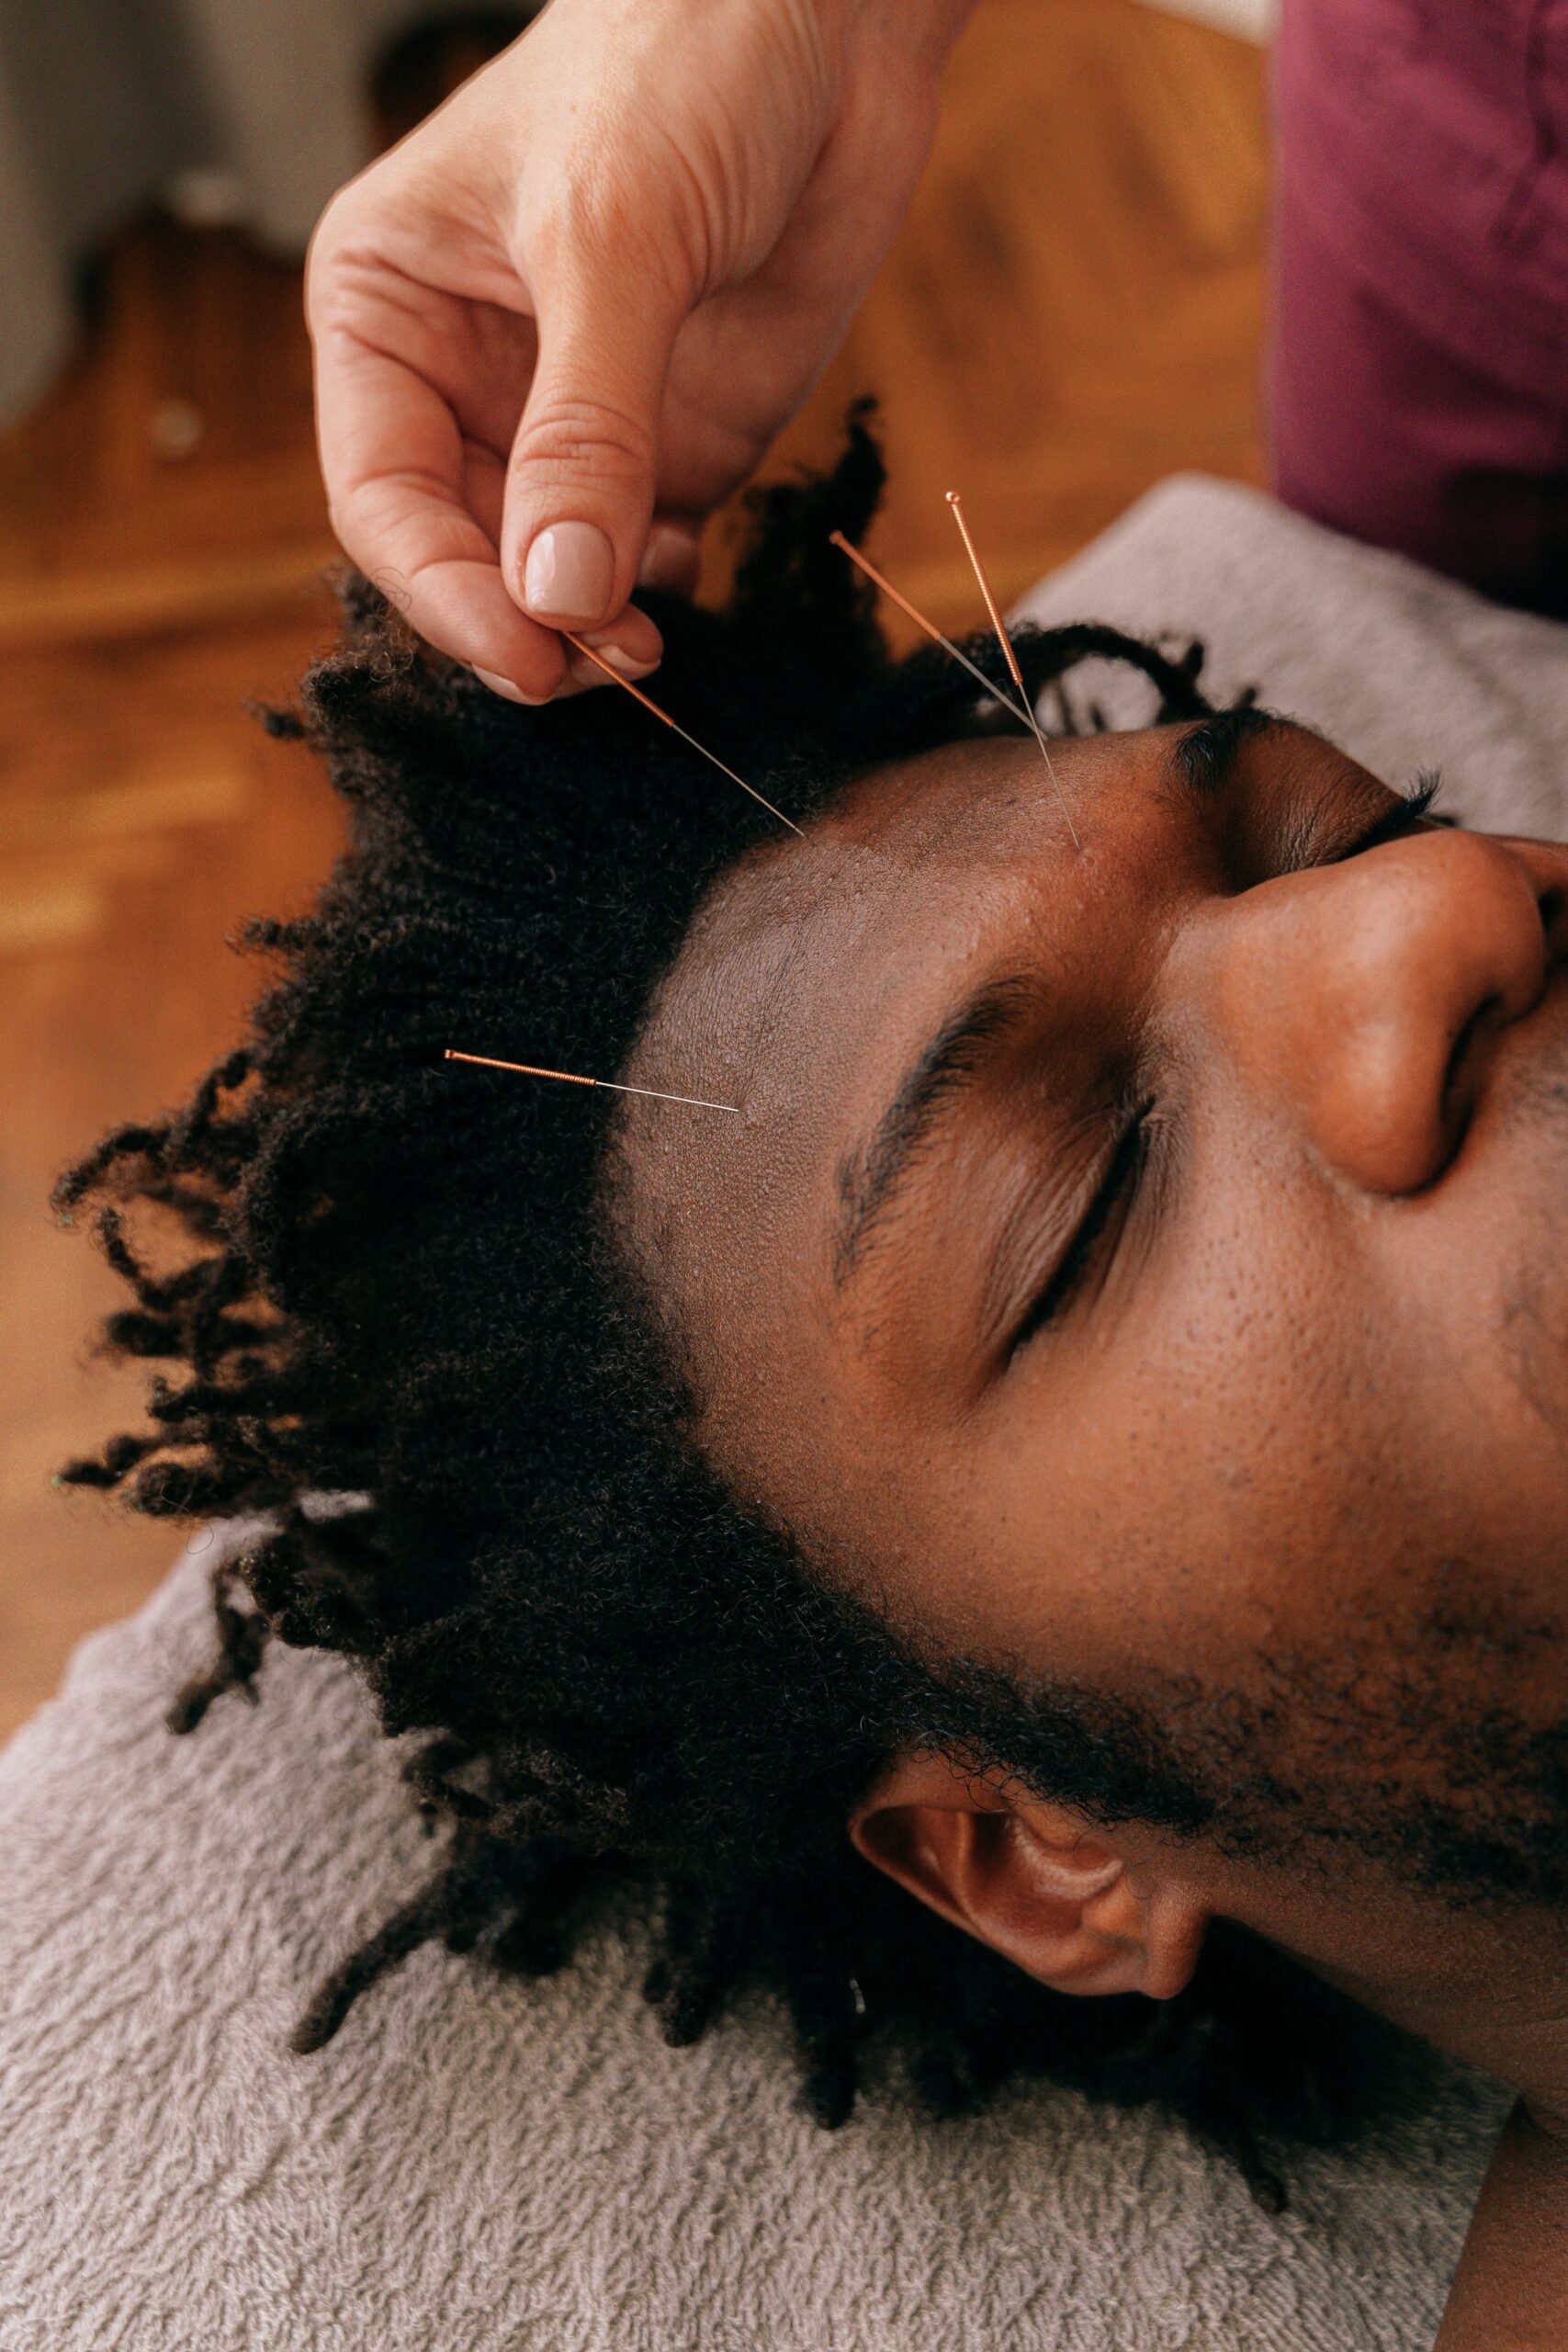 HOW TO INCORPORATE ACUPUNCTURE INTO YOUR MINDFULNESS PRACTICE